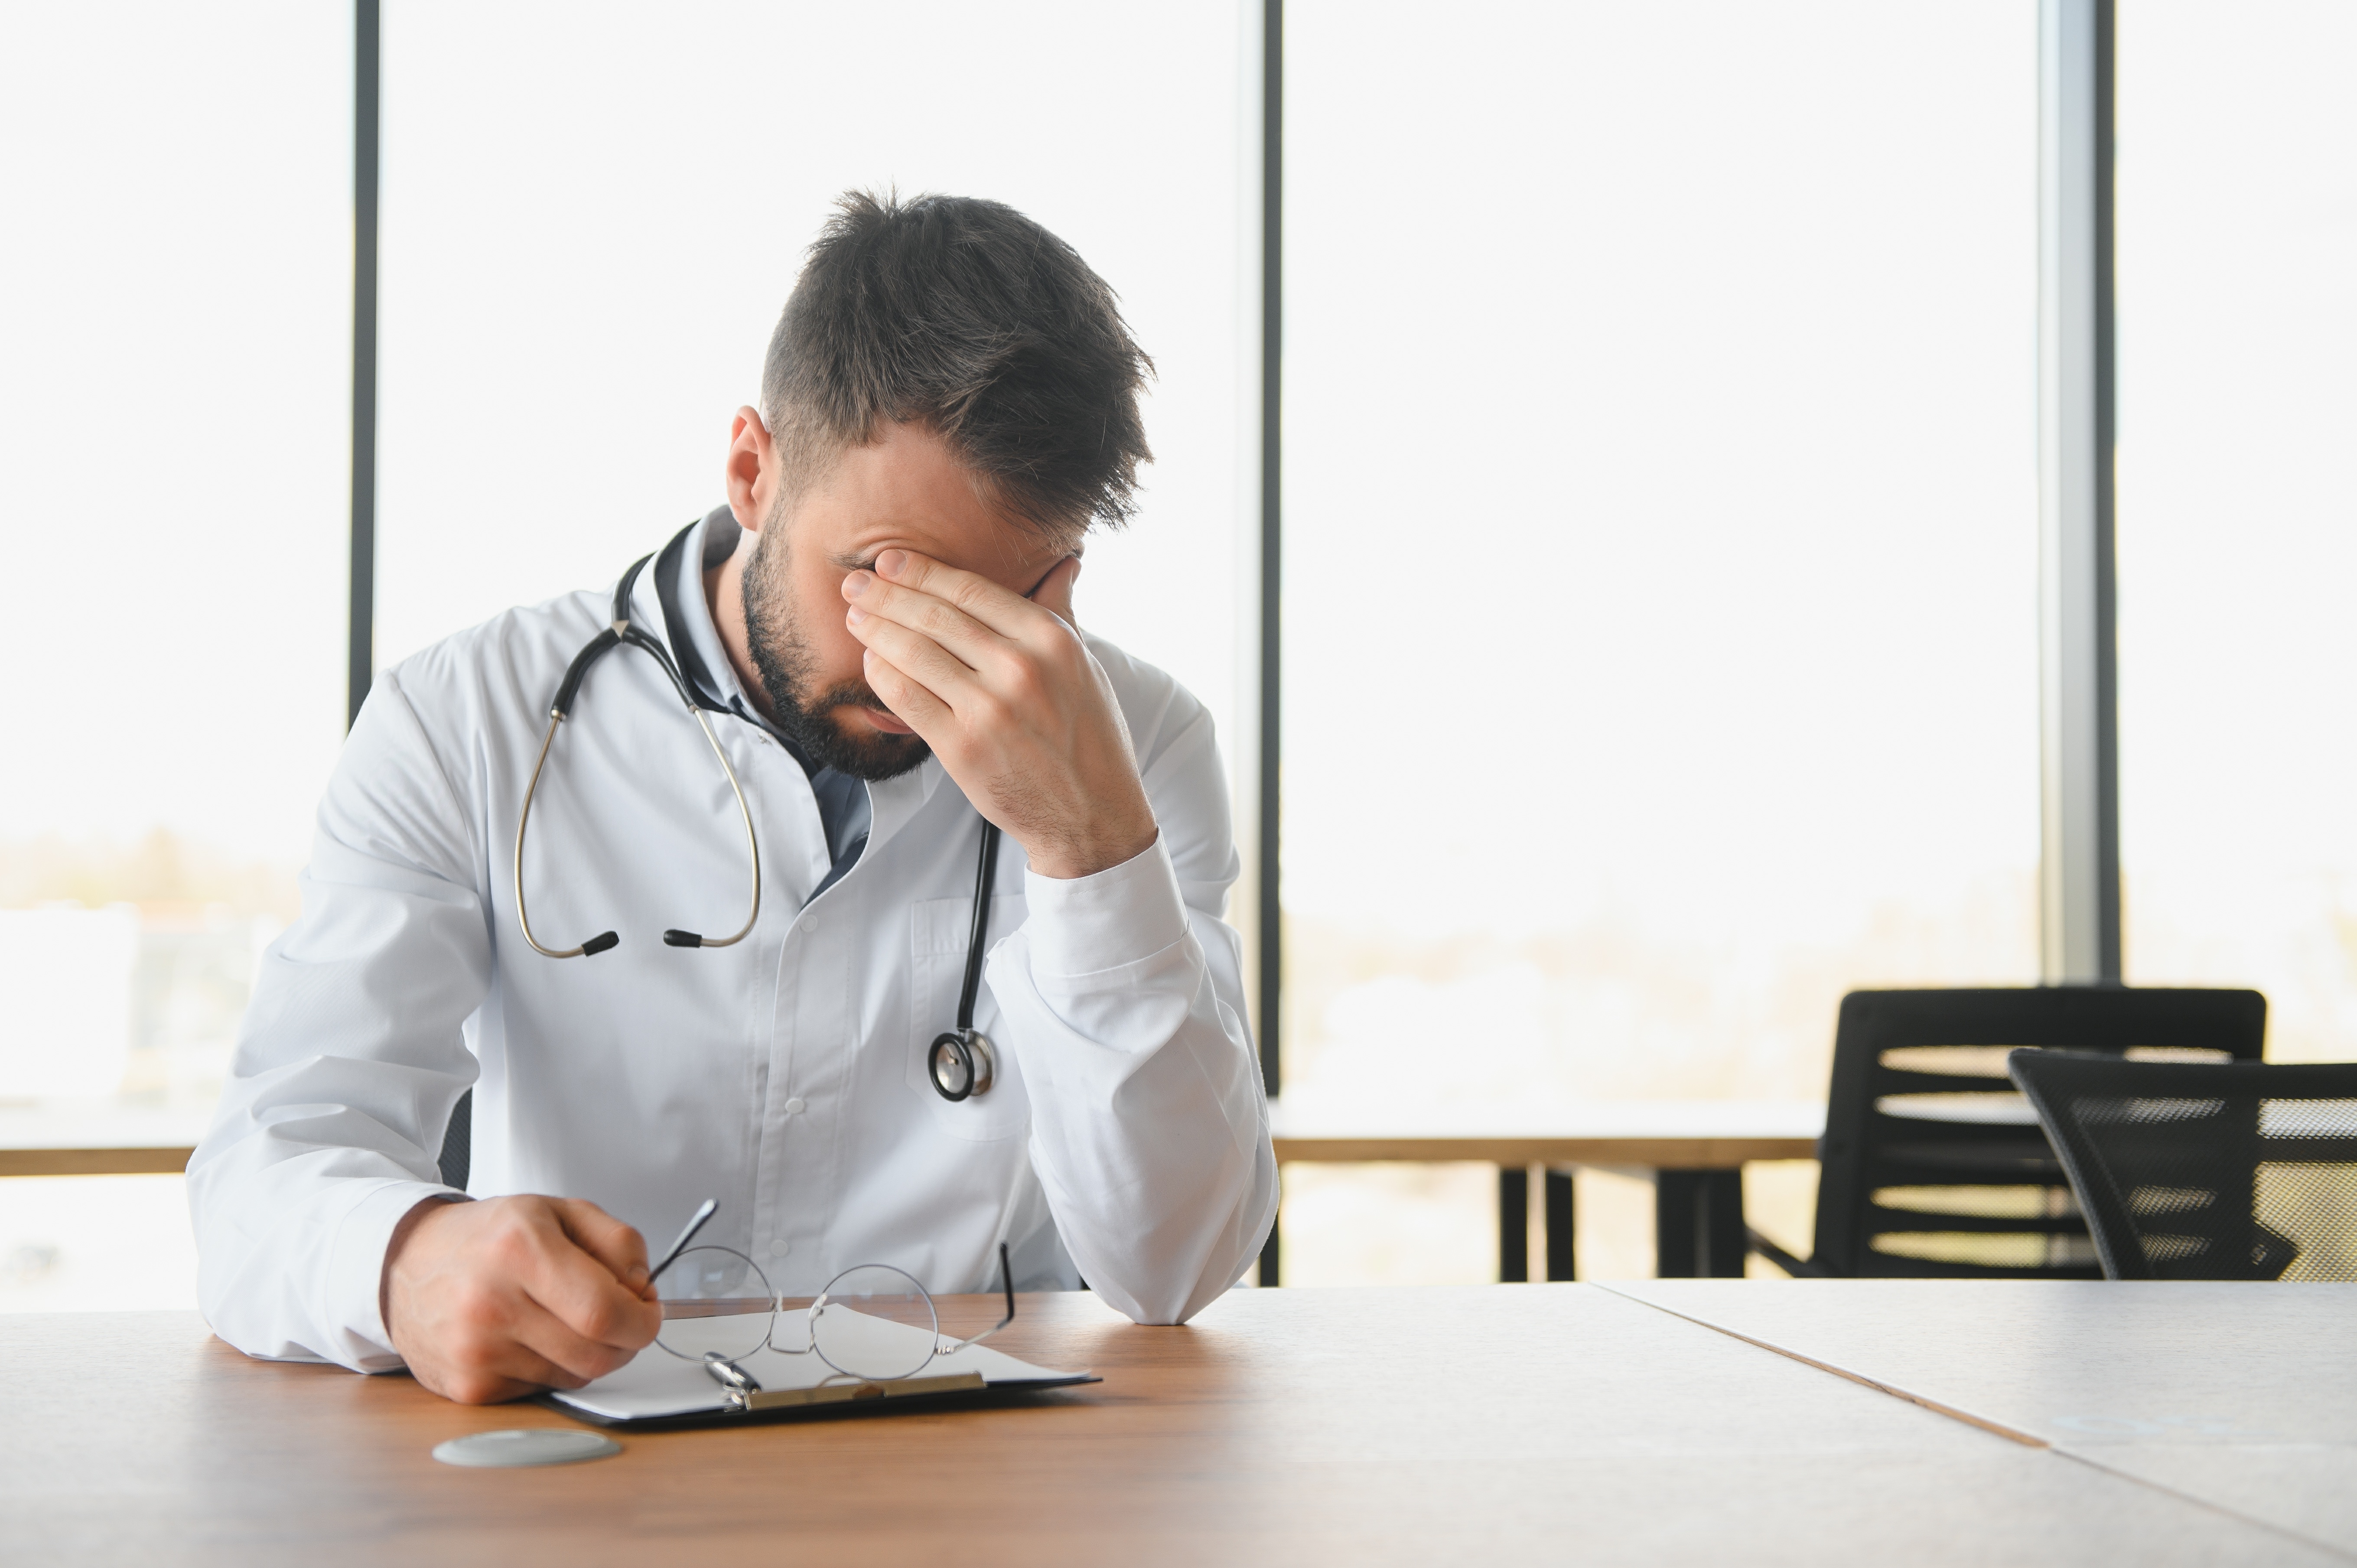 A young male doctor feeling exhausted | Source: Shutterstock